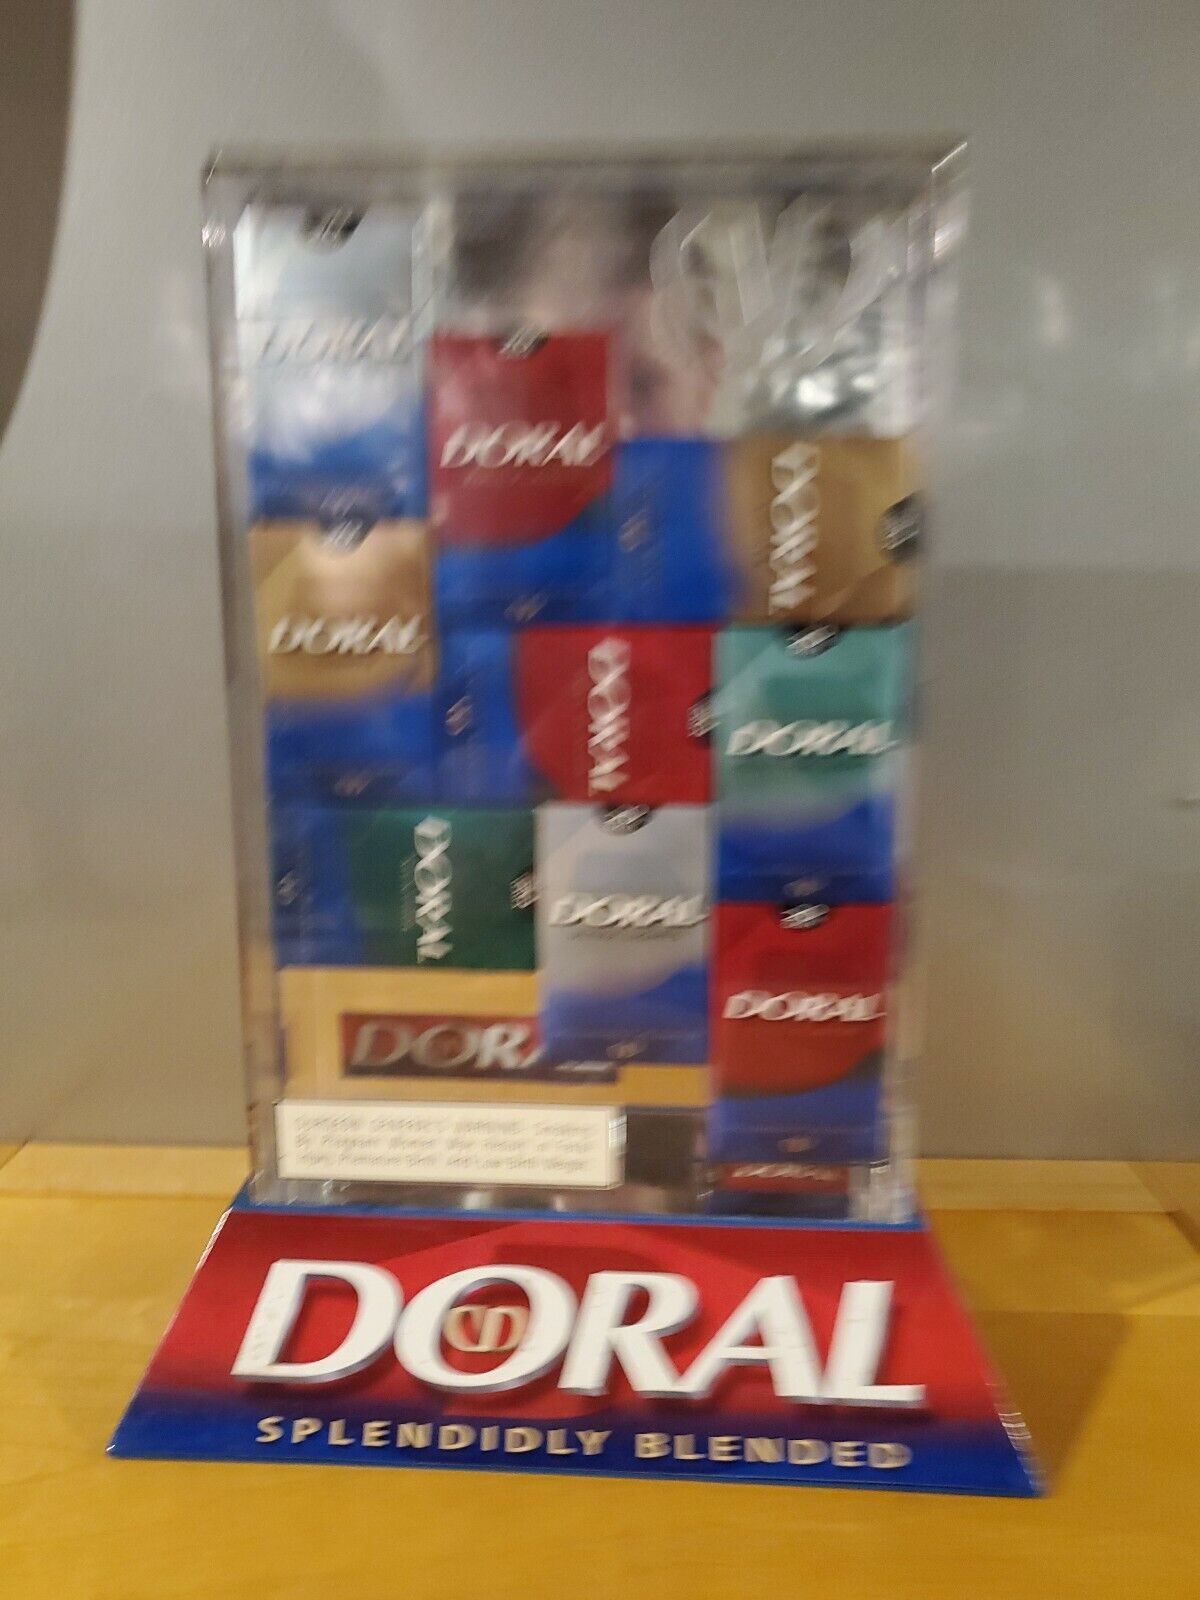 Doral Cigarettes Vintage Counter Display with Mirrored Back